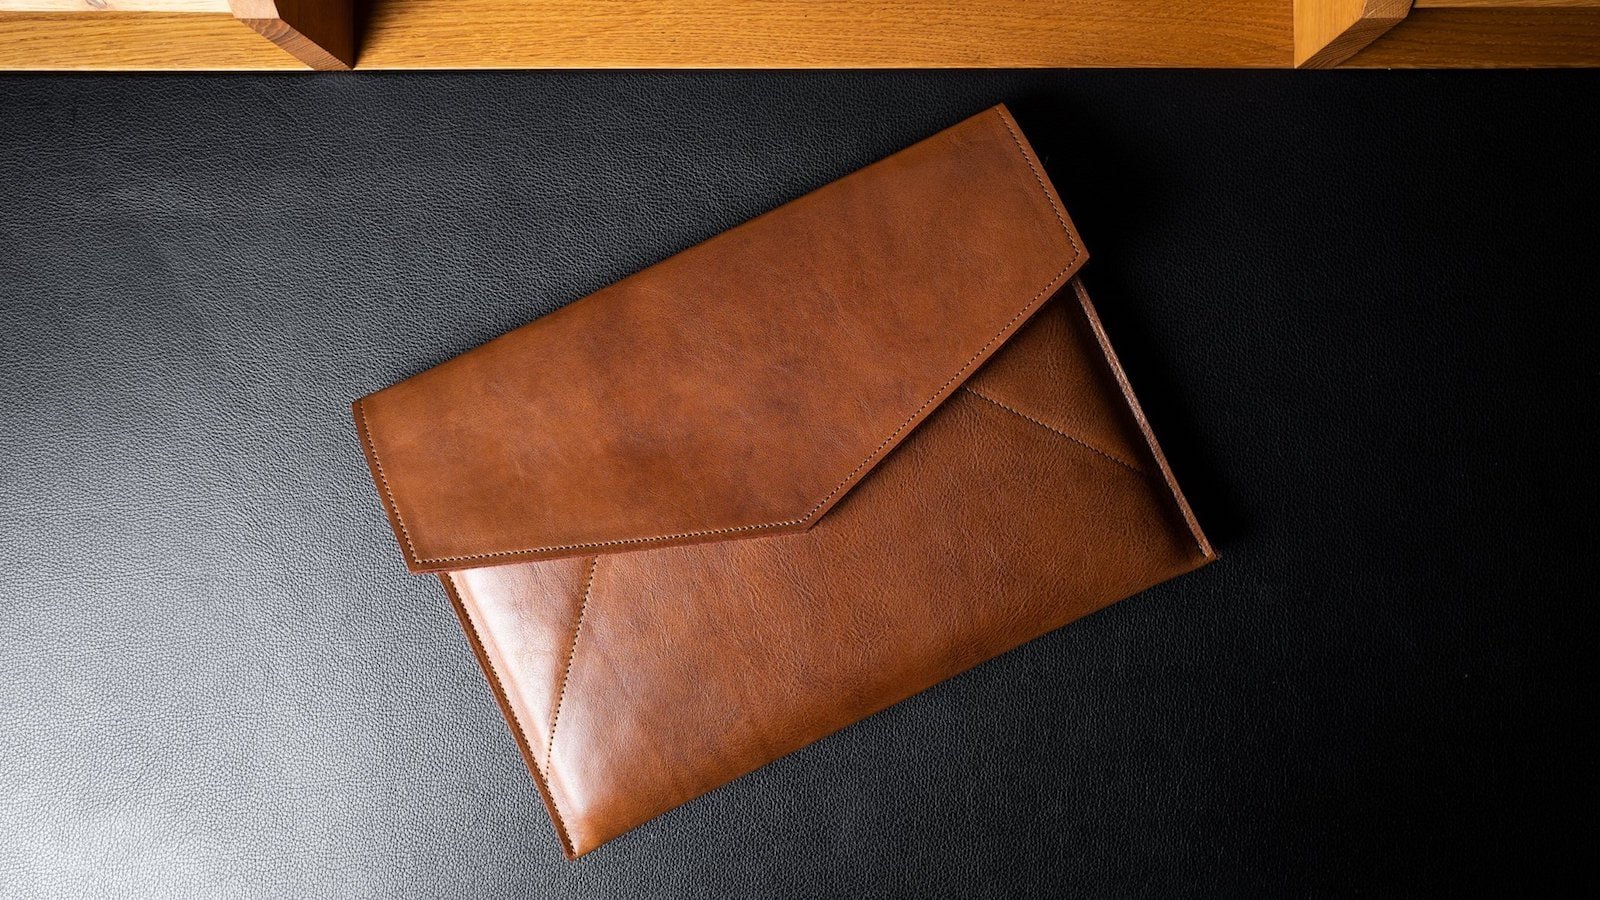 hardgraft Leather Envelope Large has a thick felted wool lining to protect your devices